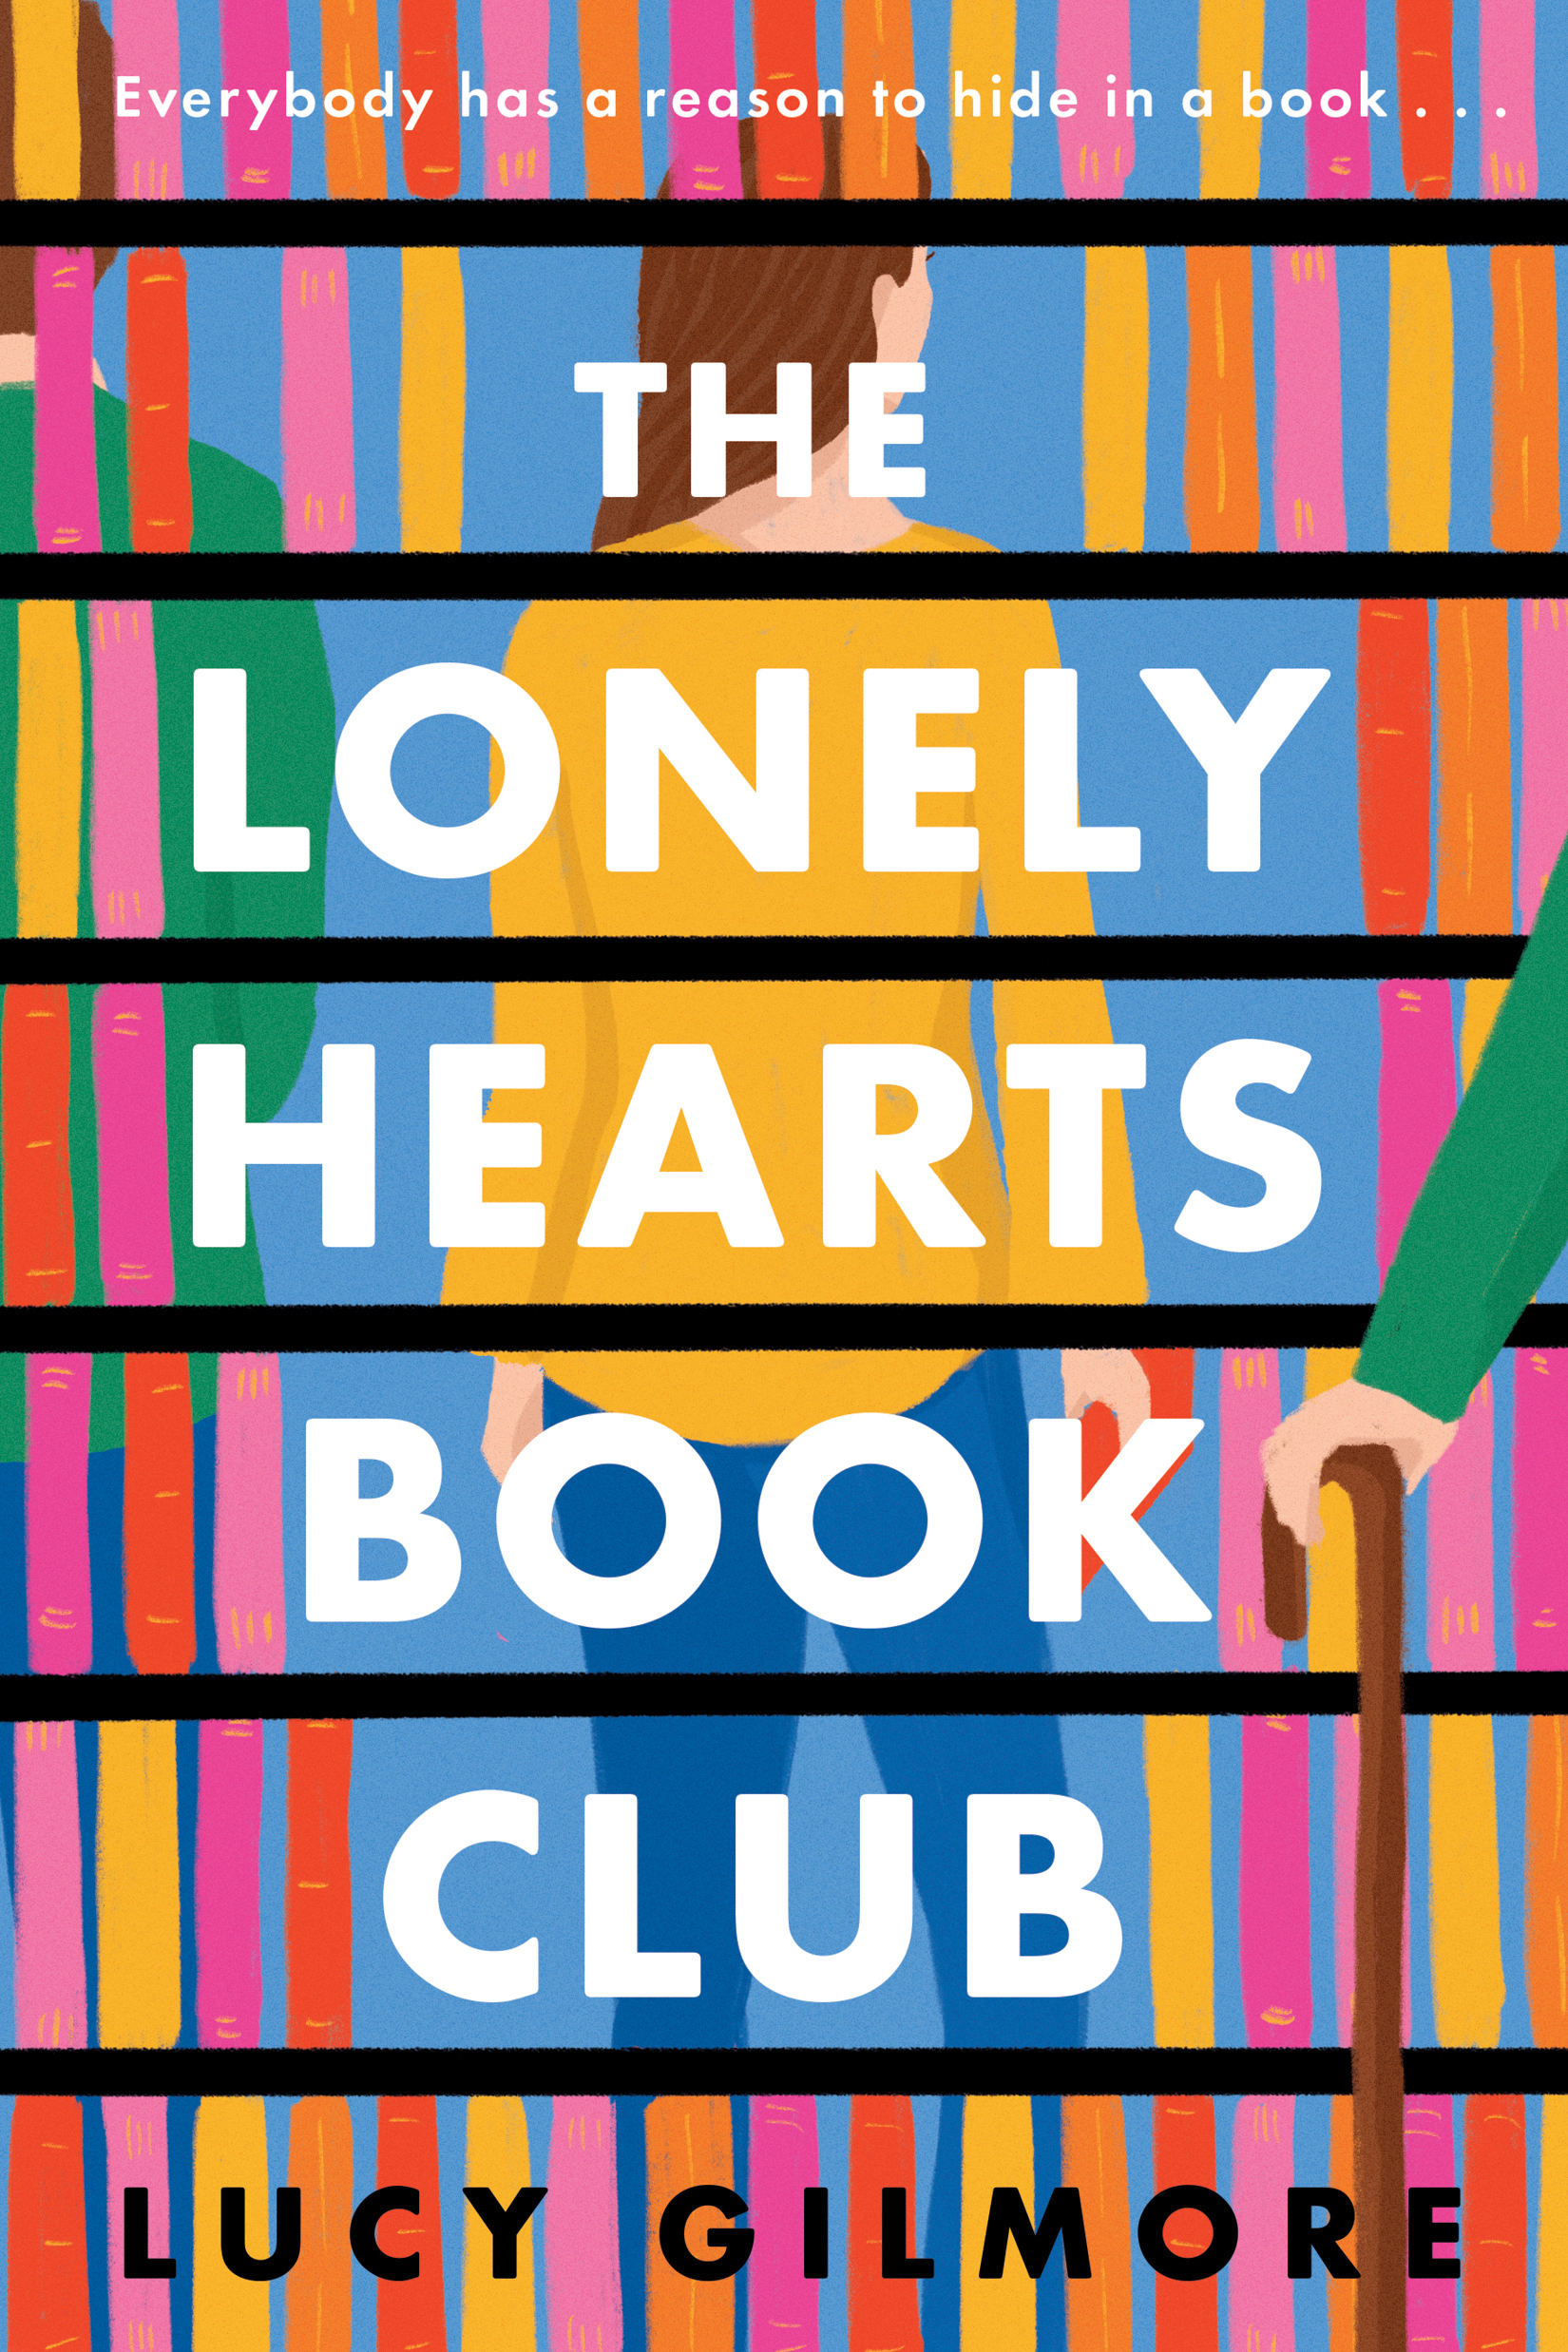 The book cover for "The Lonely Hearts Book Club" by Lucy Gilmore. 